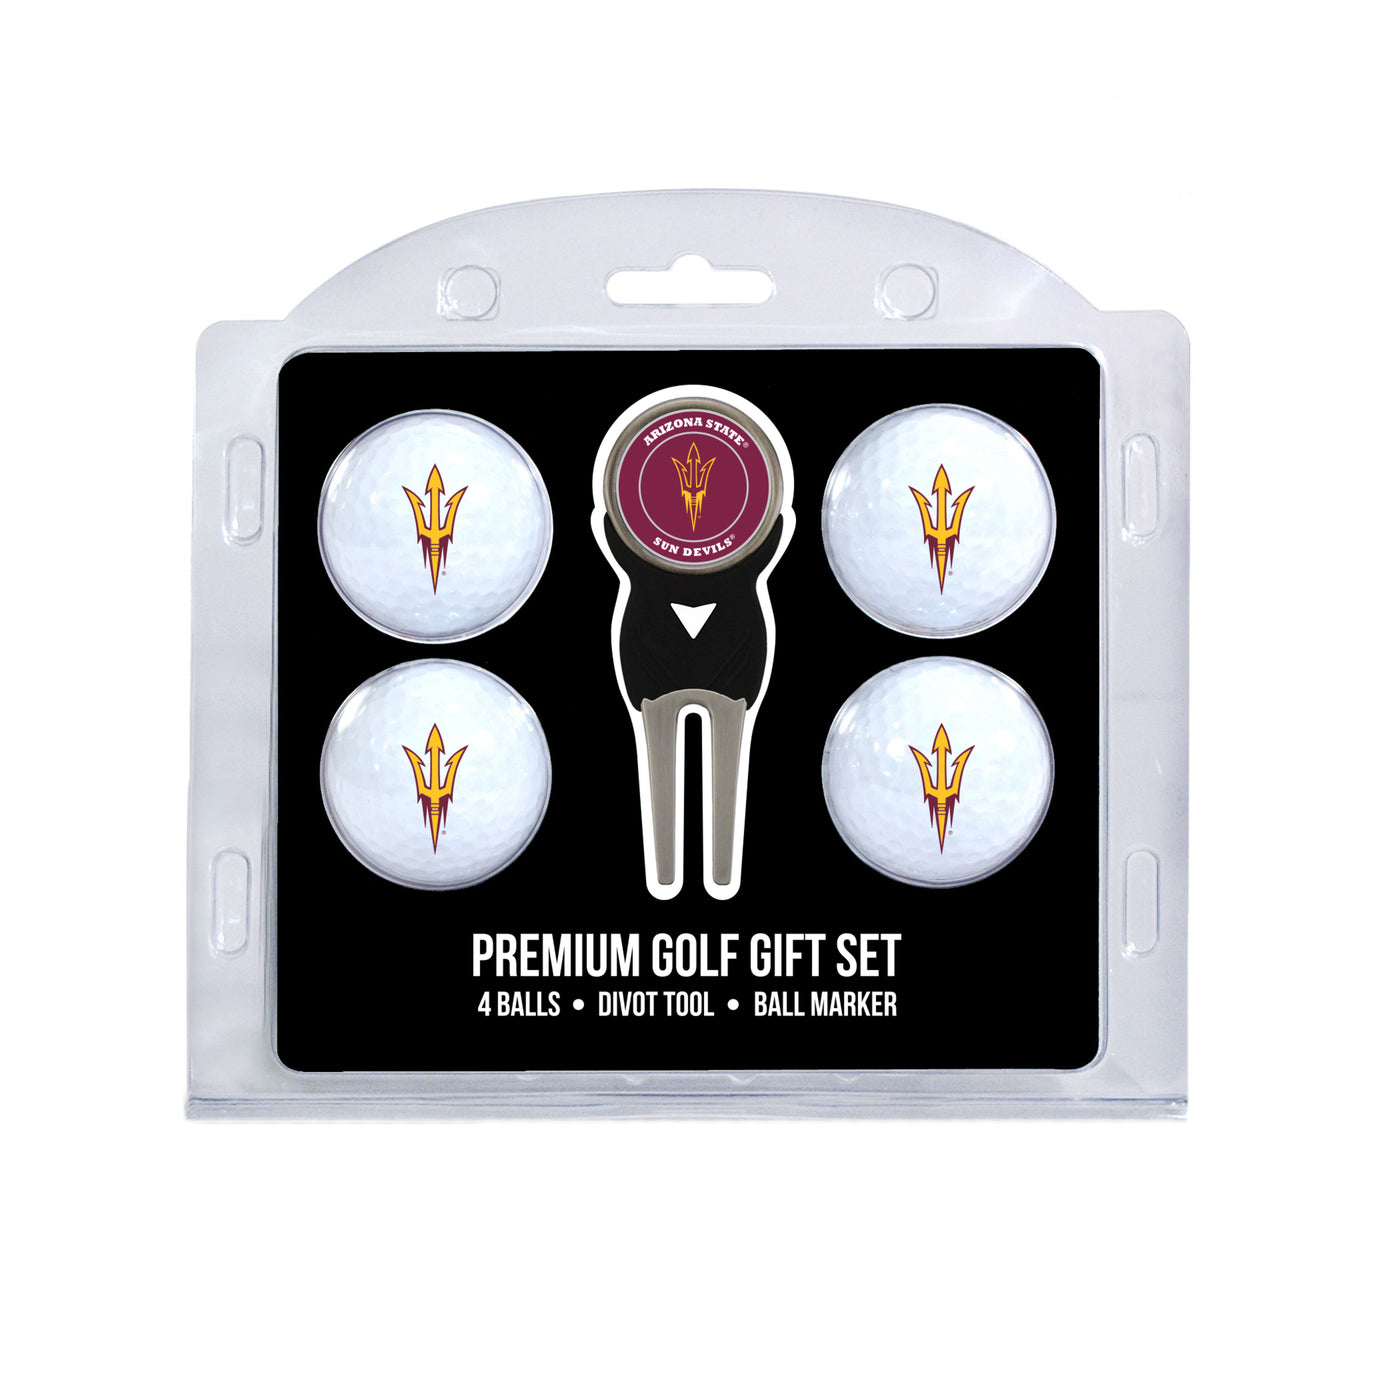 ASU 4 ball gift set with divot tool and pitchforks printed on each item